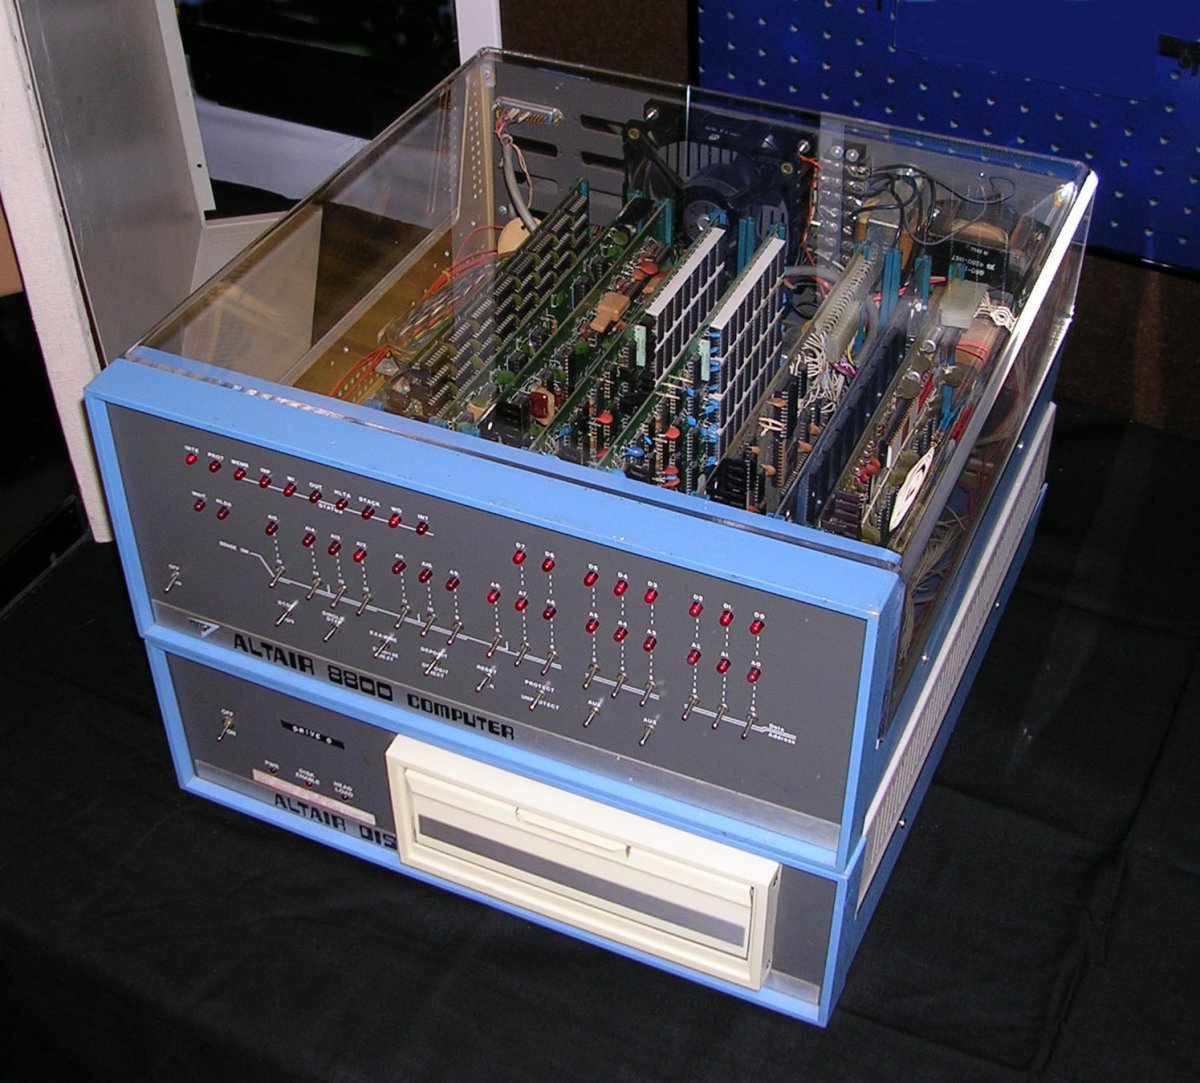 in-1974-everything-changed-a-company-called-mits-released-the-altair-8800--a-breakthrough-pc-based-on-the-intel-8080-processor-which-made-it-easier-than-ever-for-hobbyists-and-amateurs-to-code-software